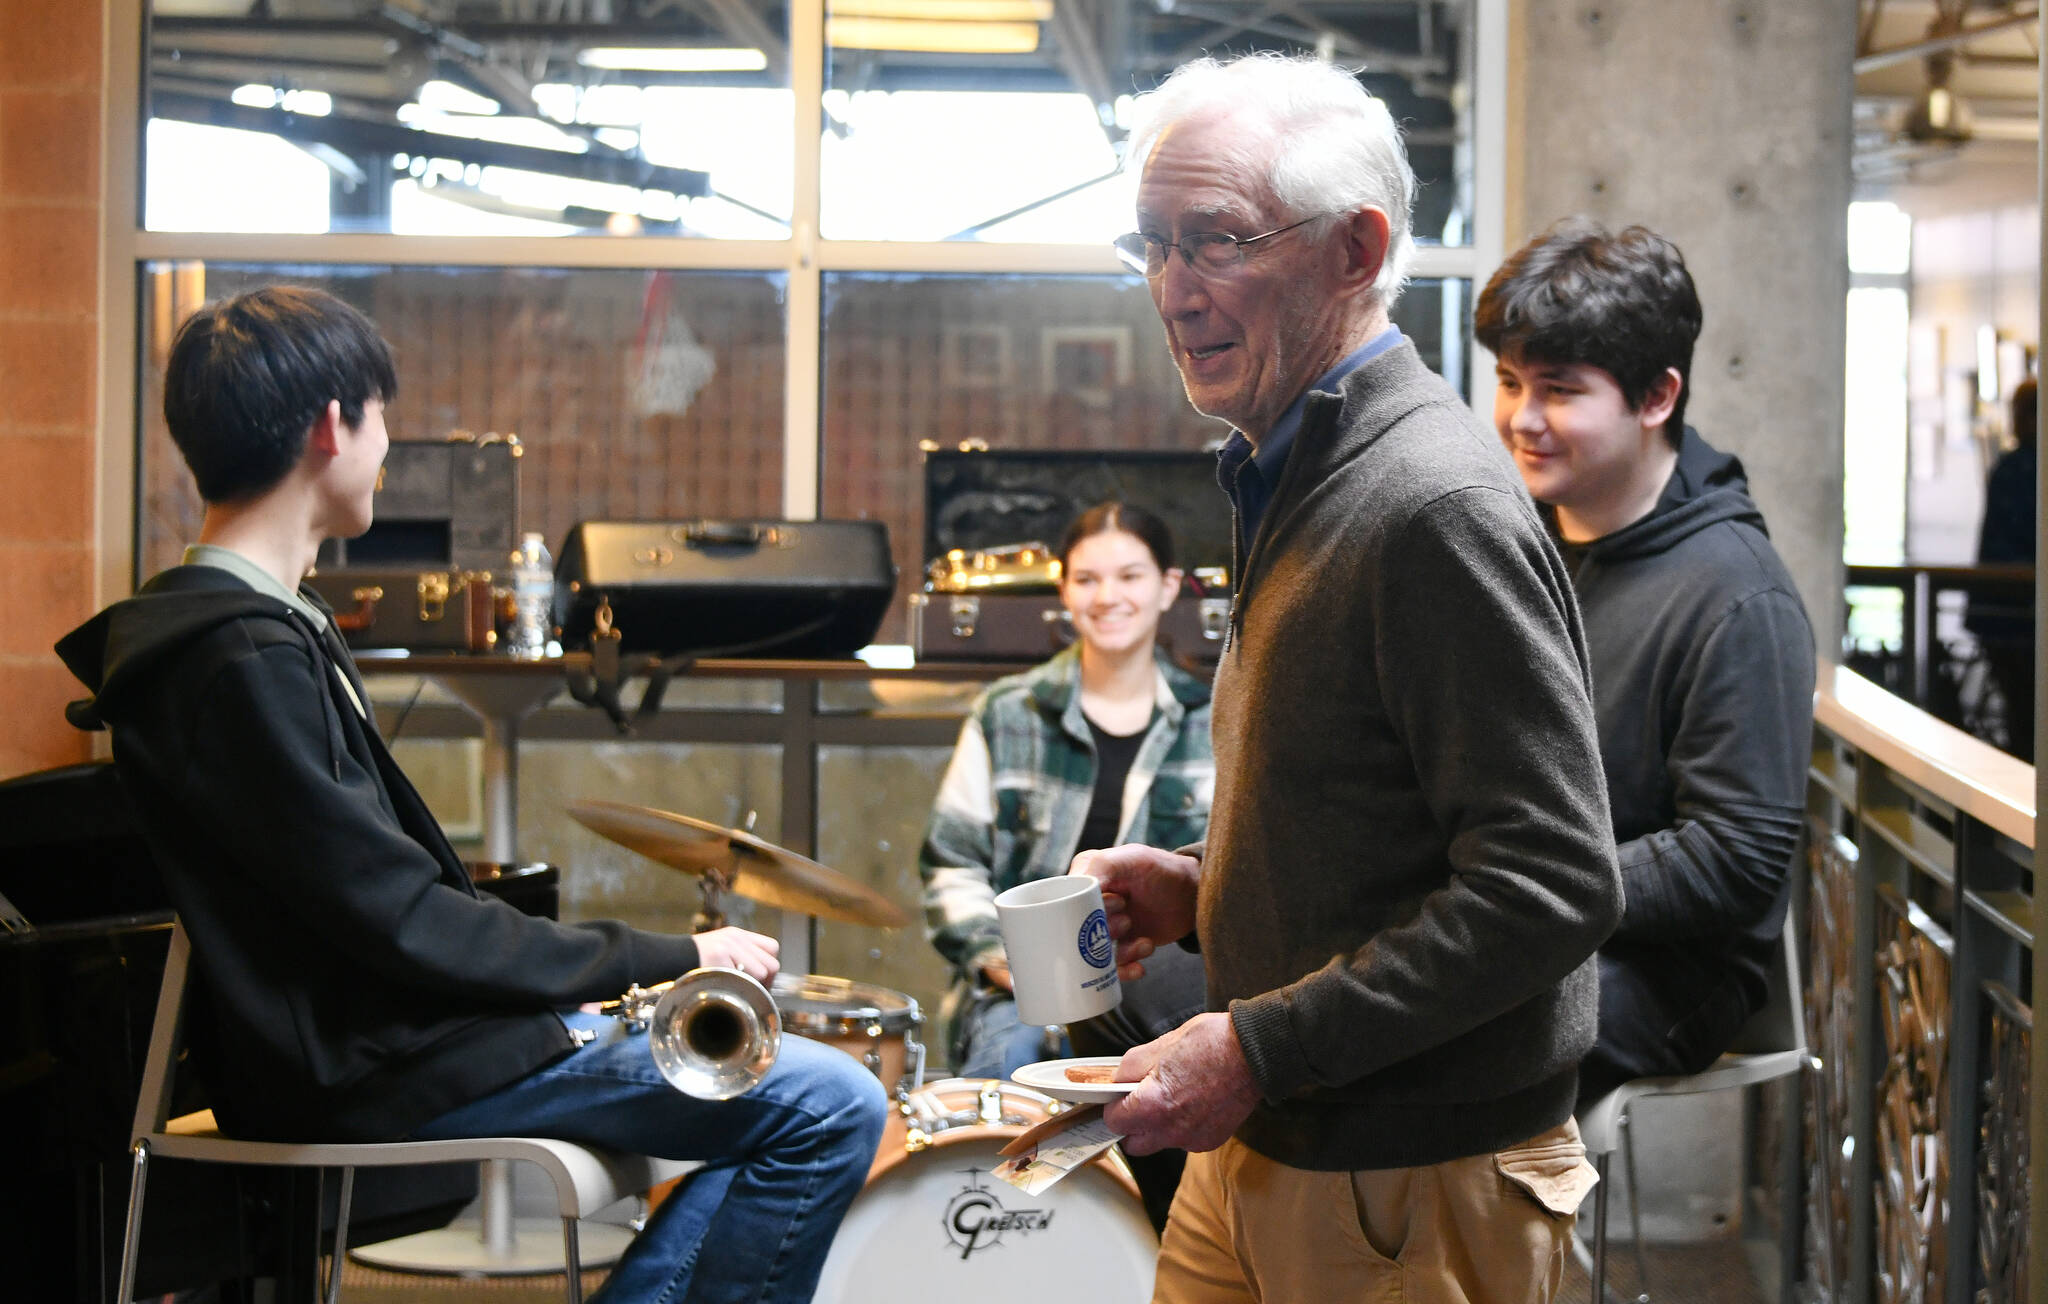 Fletch Waller, a volunteer with Wider Horizons, visits with Music in the Community club jazz band members and Mercer Island High School students, from left, Giovanni Ng (trumpet), Alanna Larson (drums) and Elliott Yaroslavsky (trumpet) at the city of Mercer Island’s Senior Resource Fair on March 2 at the Mercer Island Community and Event Center. Not pictured: Ashwin Krishnaswamy (piano). Waller, whose grandson plays in the high school jazz band, joined a plethora of attendees at the event, which featured 45 vendors, including Aegis Living/Mercer Island, Aljoya Mercer Island, Covenant Living at the Shores, PT Solutions Physical Therapy, Elderwise and more. Aegis and Belle Harbour sponsored the event. Andy Nystrom/ staff photo